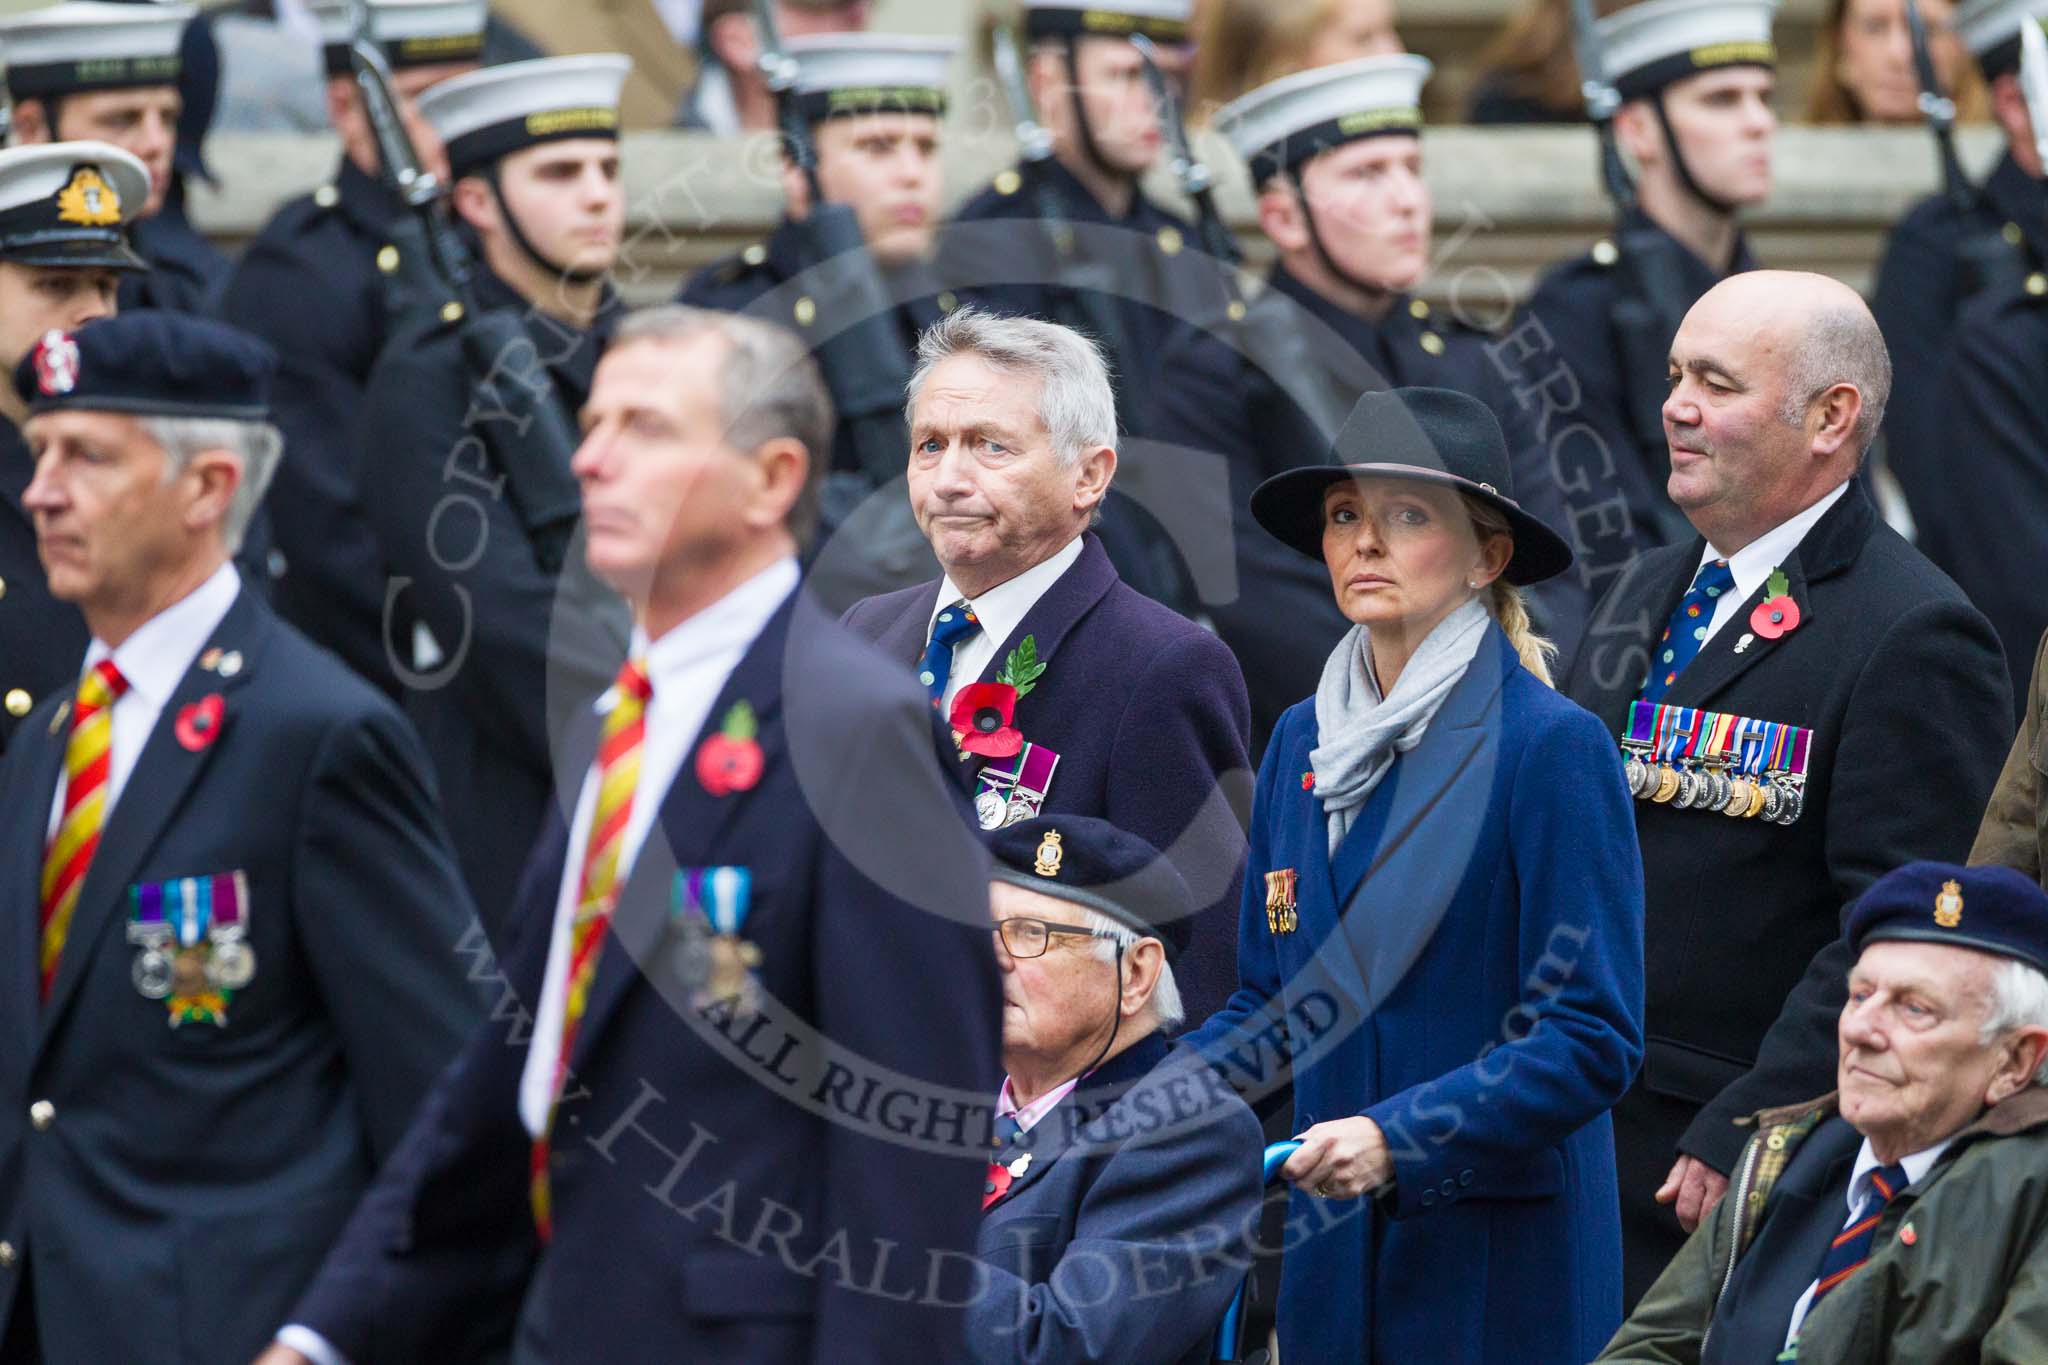 Remembrance Sunday at the Cenotaph 2015: Group B30, Association of Ammunition Technicians.
Cenotaph, Whitehall, London SW1,
London,
Greater London,
United Kingdom,
on 08 November 2015 at 11:42, image #229